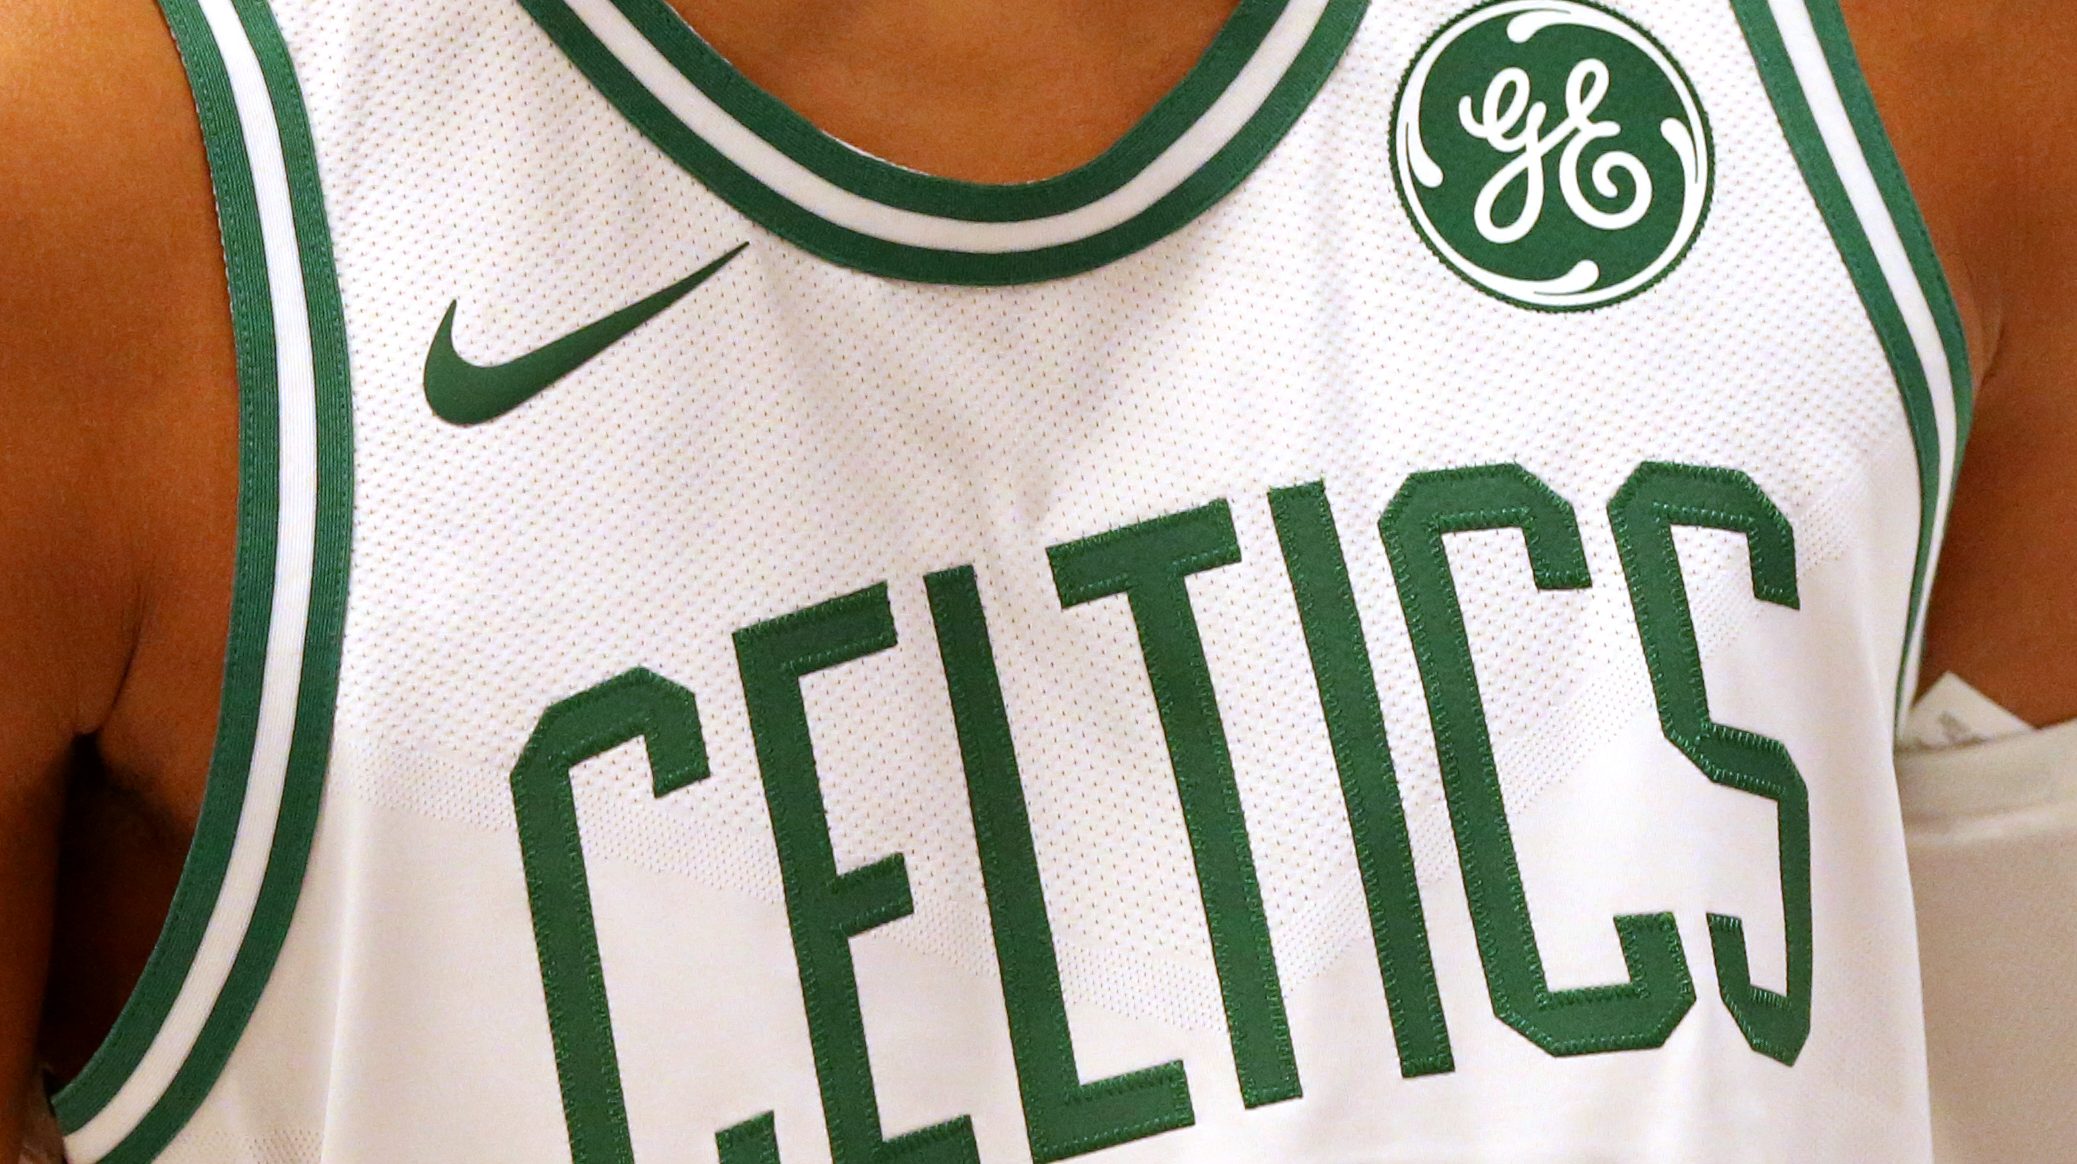 GE Pays Boston Celtics Over $7 Million a Year for Ads on Jerseys